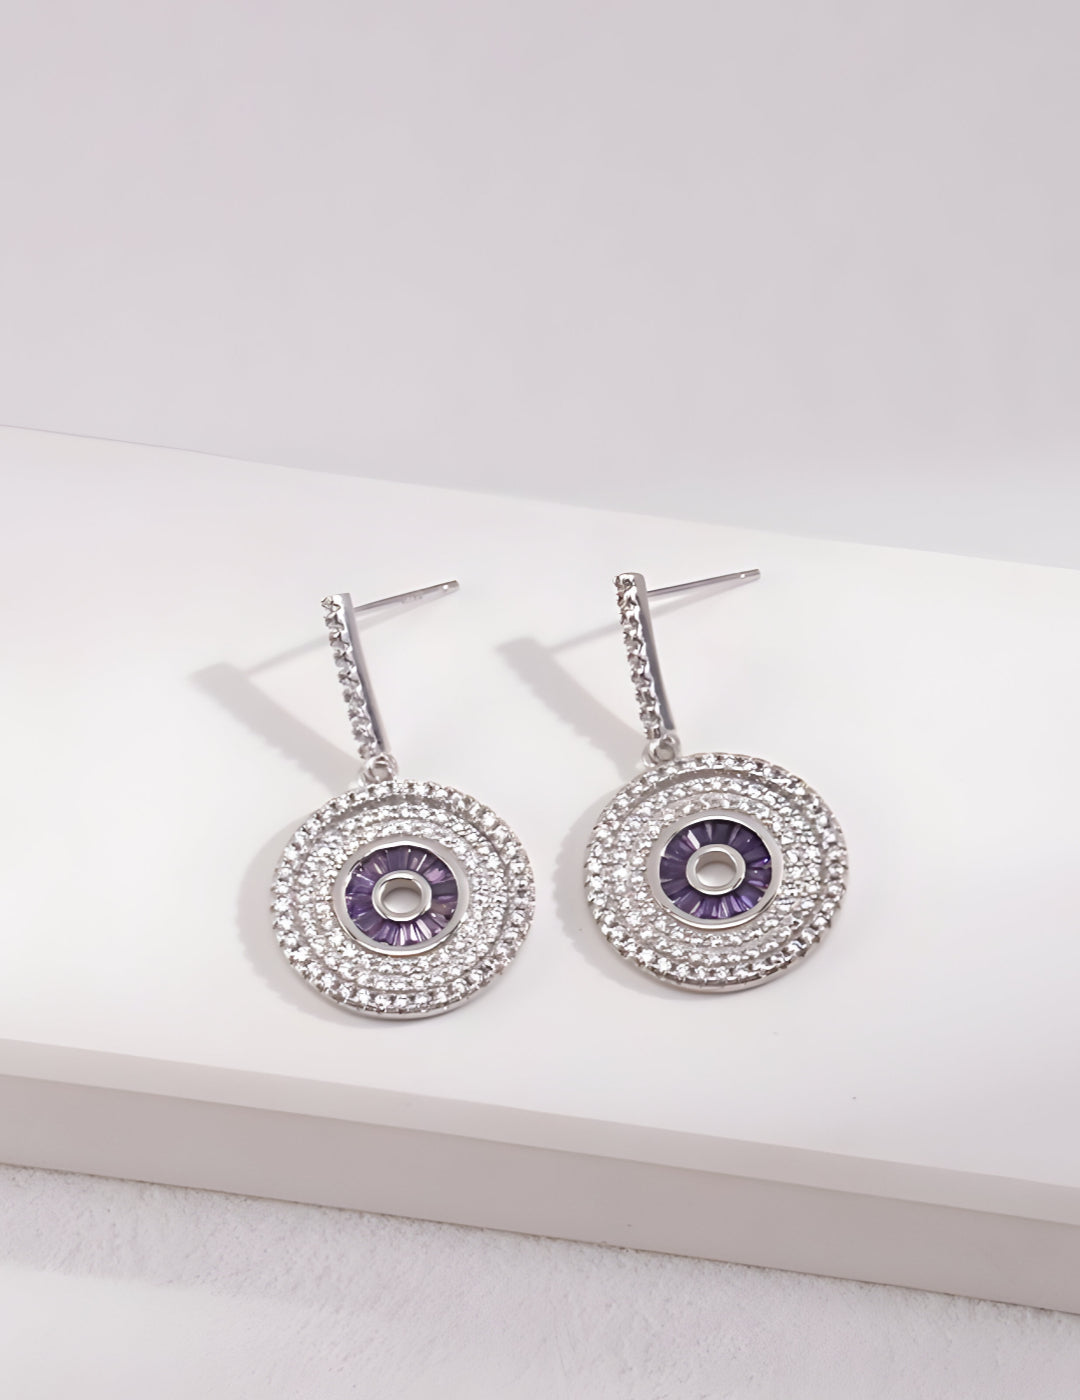  Intricately designed earrings - Chic and Timeless  - Crafted with love and attention to detail, these earrings are perfect for any occasion - S925 Sterling Silver with 18K Gold Vermeil- Sparkling Zircon